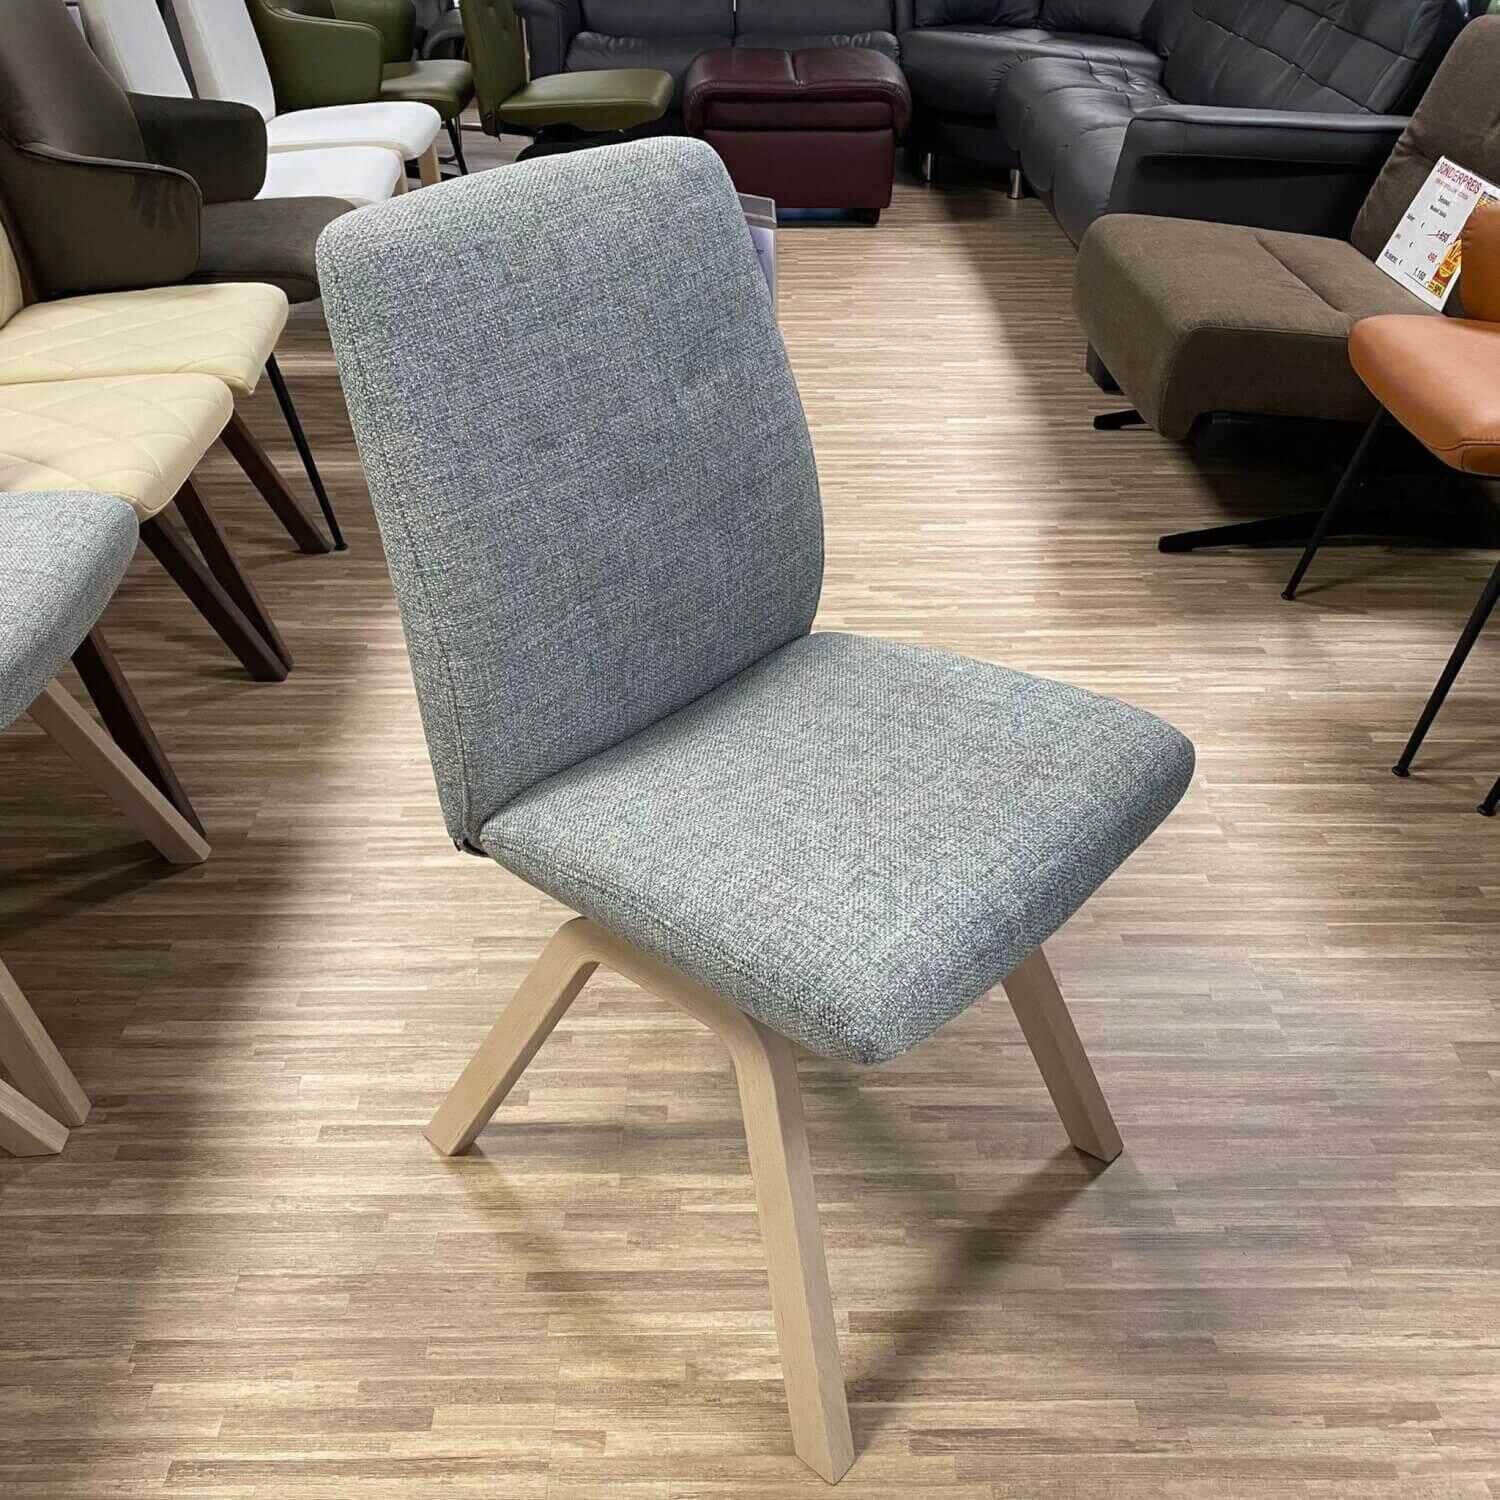 Stressless Dining Chair Rosemary Linden Light Blue Low Back D200 Whitewash L